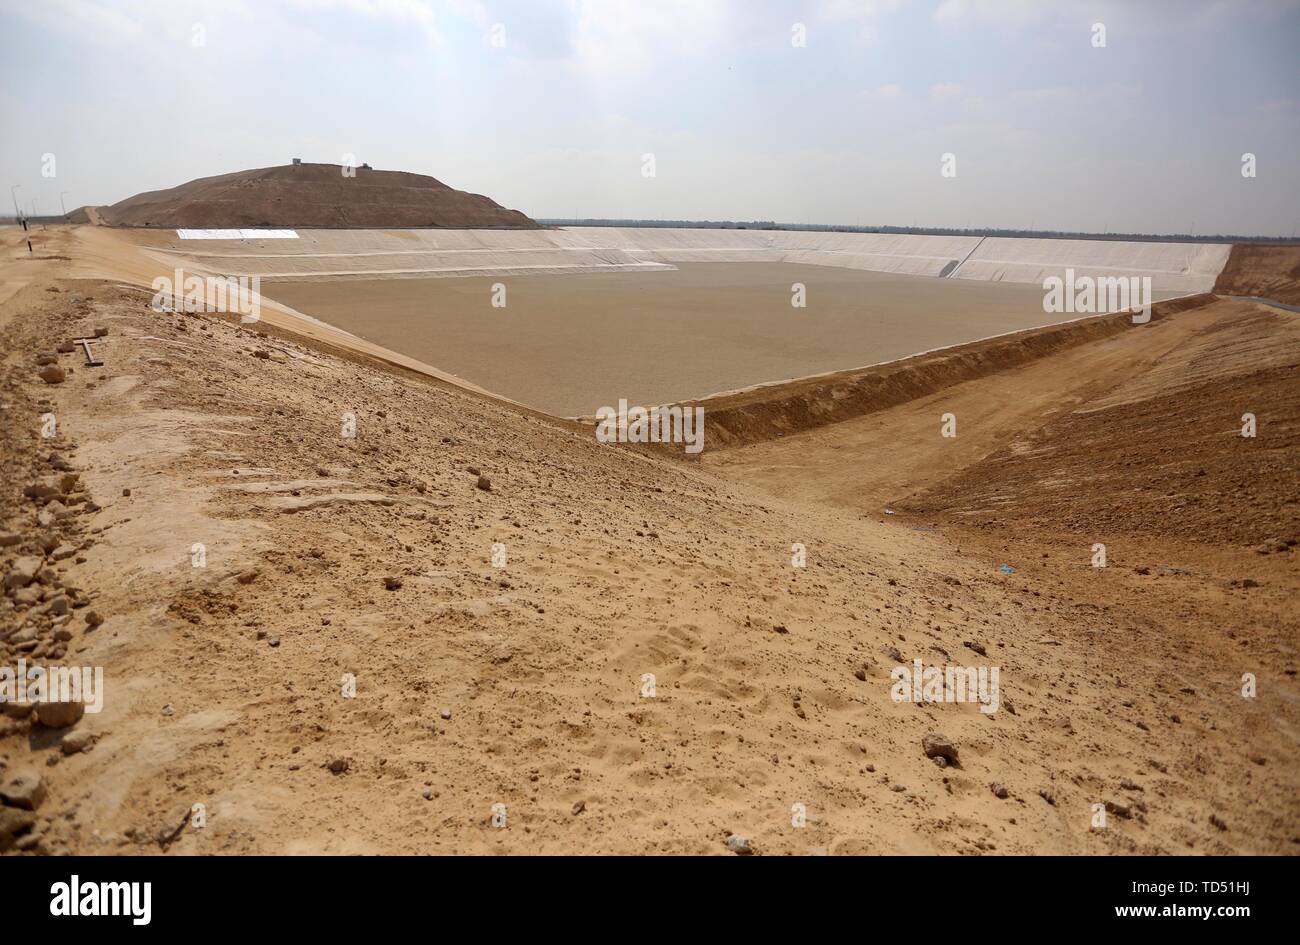 June 11, 2019 - Khan Younis, Gaza Strip, Palestinian Territory - The general view show Al-Fukhari 'Sofa'' Landfill in Khan younis in the southern, on June 12, 2019. The Gaza SWMP is a multi-donor funded project of US$ 35 million. The design was financed by a generous grant from the Islamic Development Bank (IsDB) and the implementation is financed by a pool of grants from the World Bank, the EU and France. A small grant is also provided from the Multi-Donor Trust Fund for Infrastructure administered by the World Bank. It is a comprehensive strategic infrastructure and capacity building proj Stock Photo